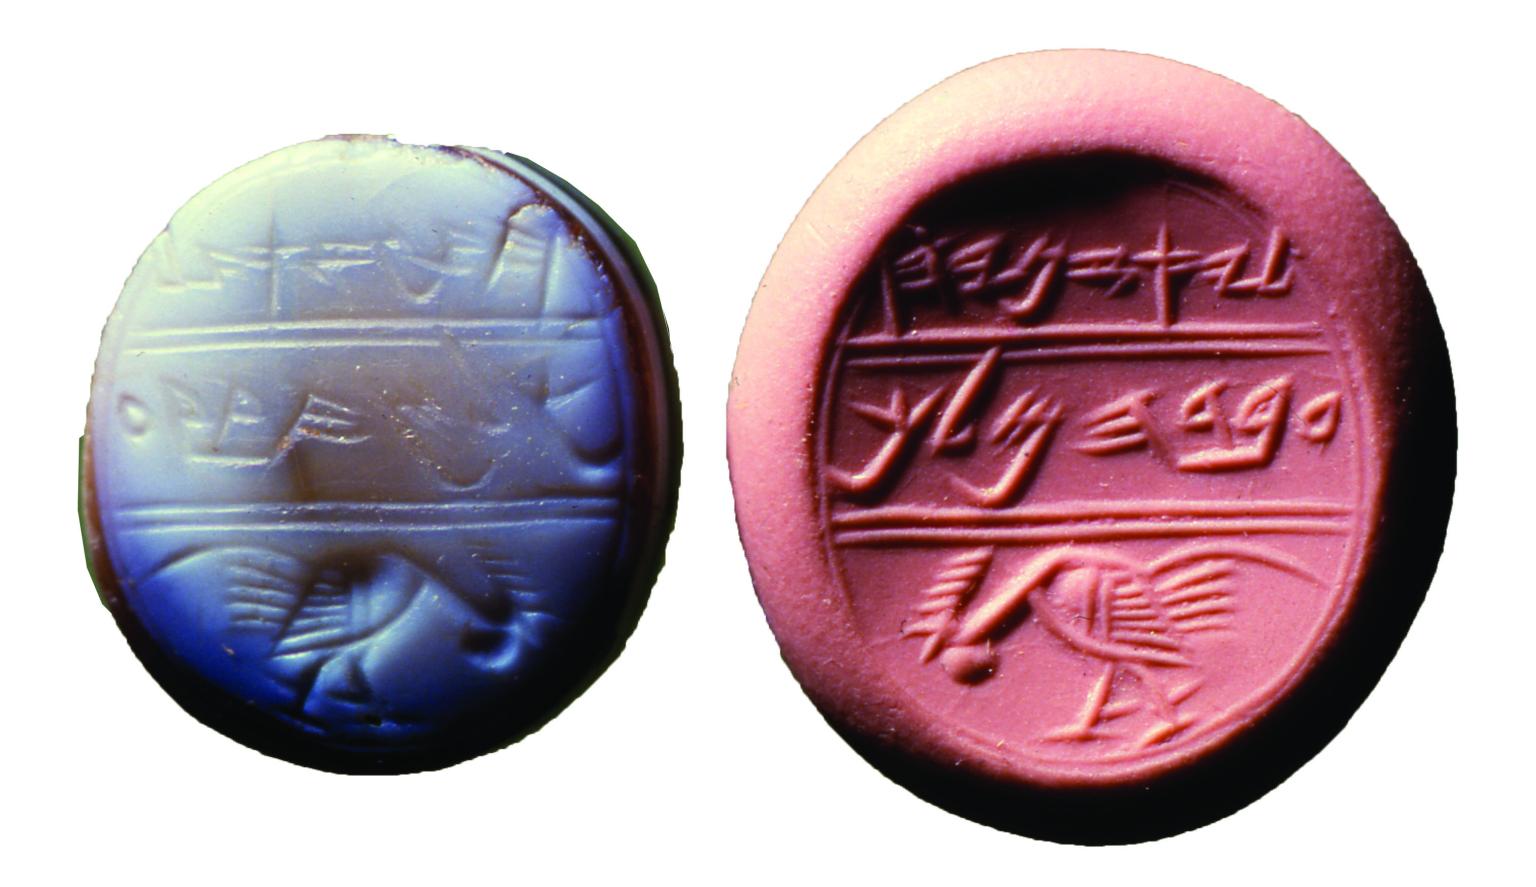 Seal impression with rooster and Hebrew inscription.